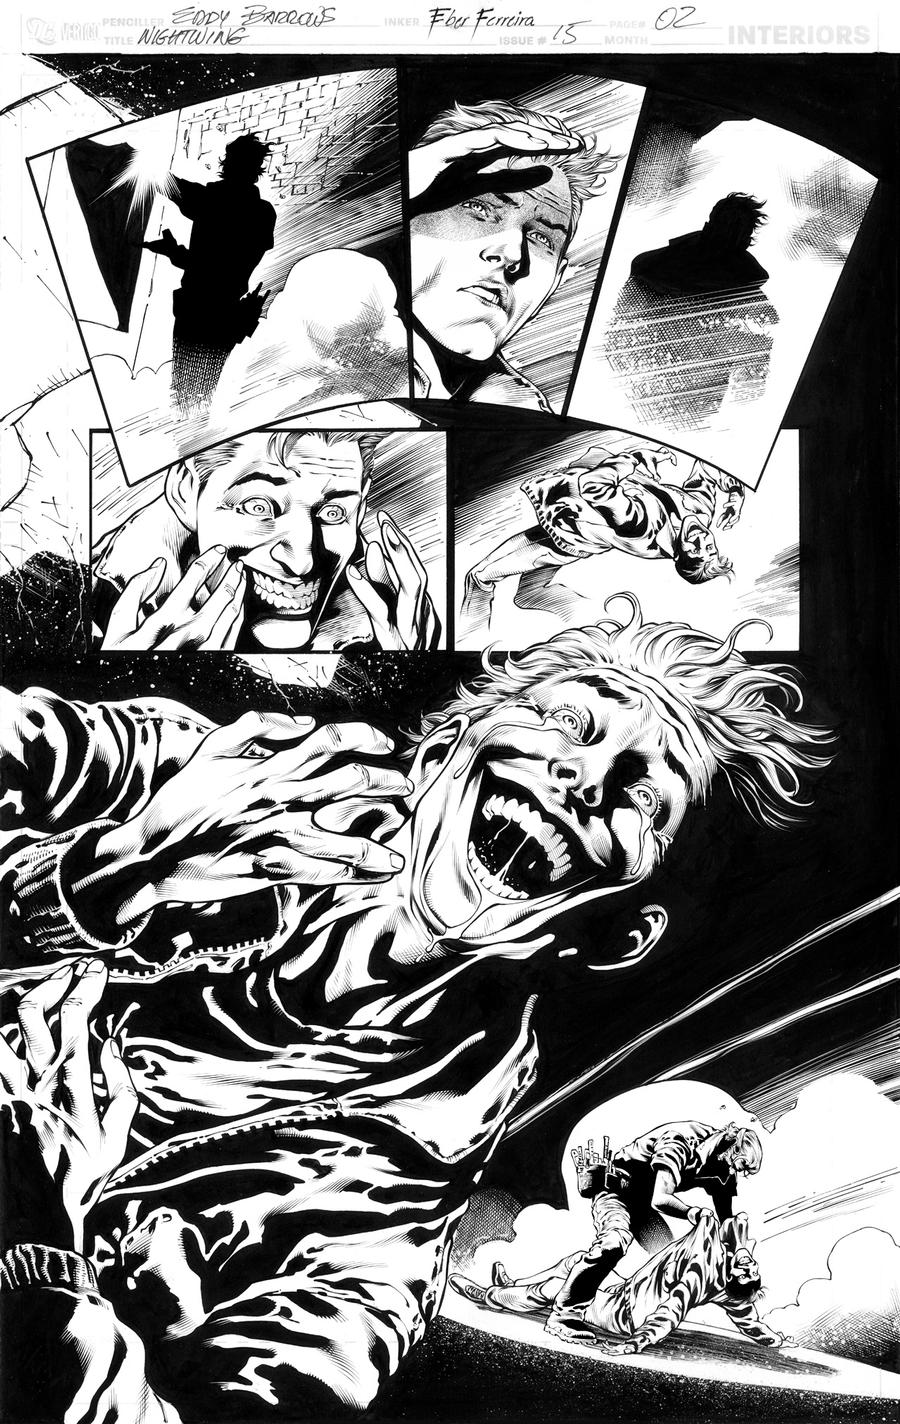 NIGHTWING#15 Page 02